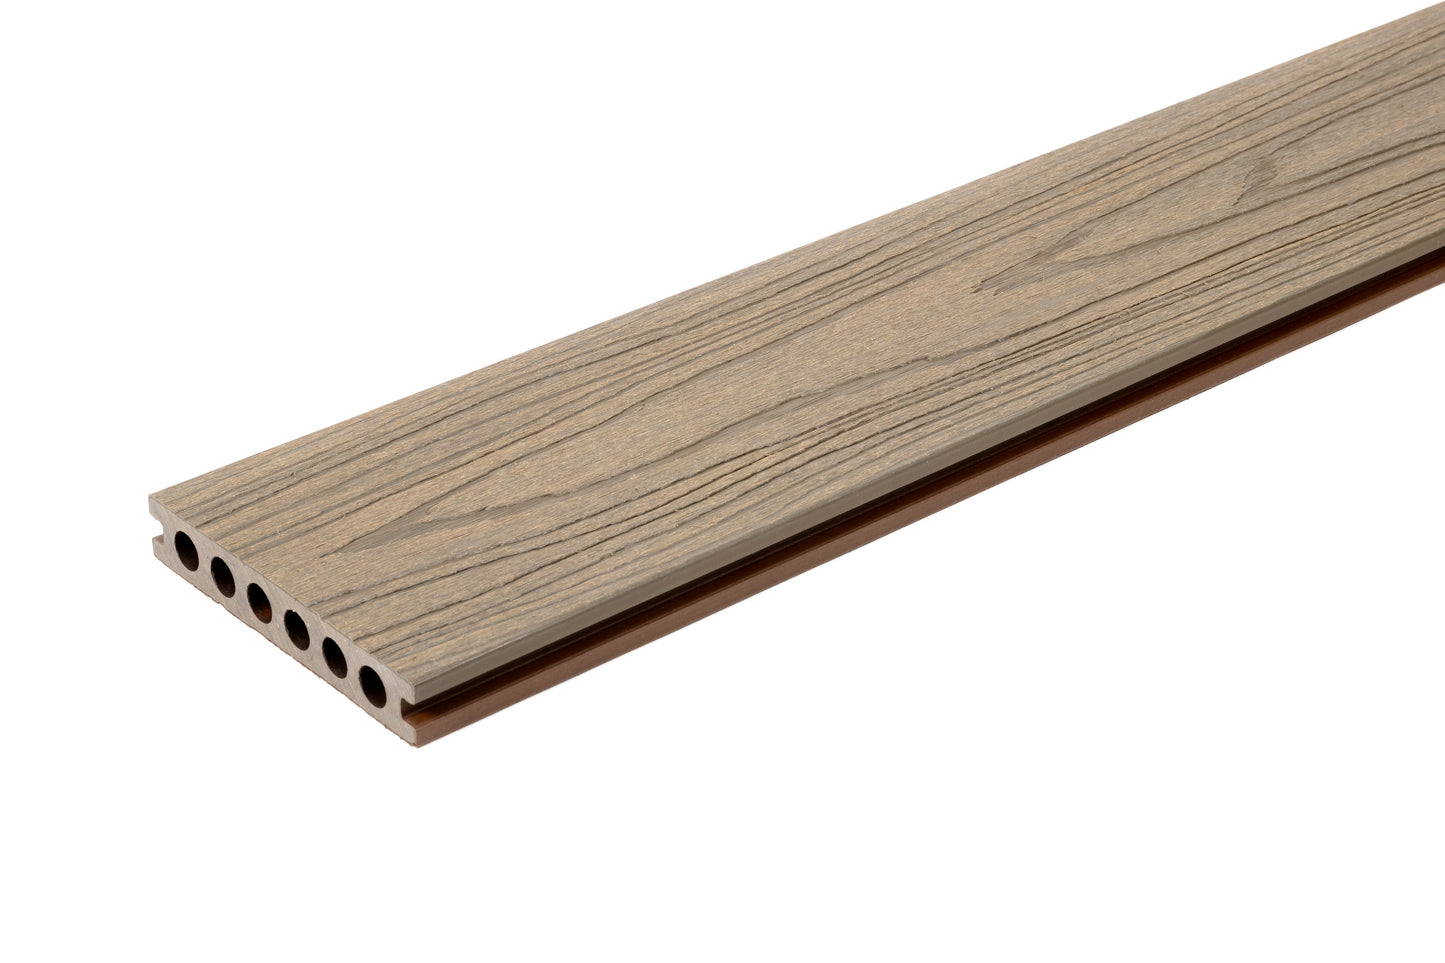 Teak/Walnut Reversible SAiGE Traditional Decking (26 Boards Only - Approximately 13 Sqm)